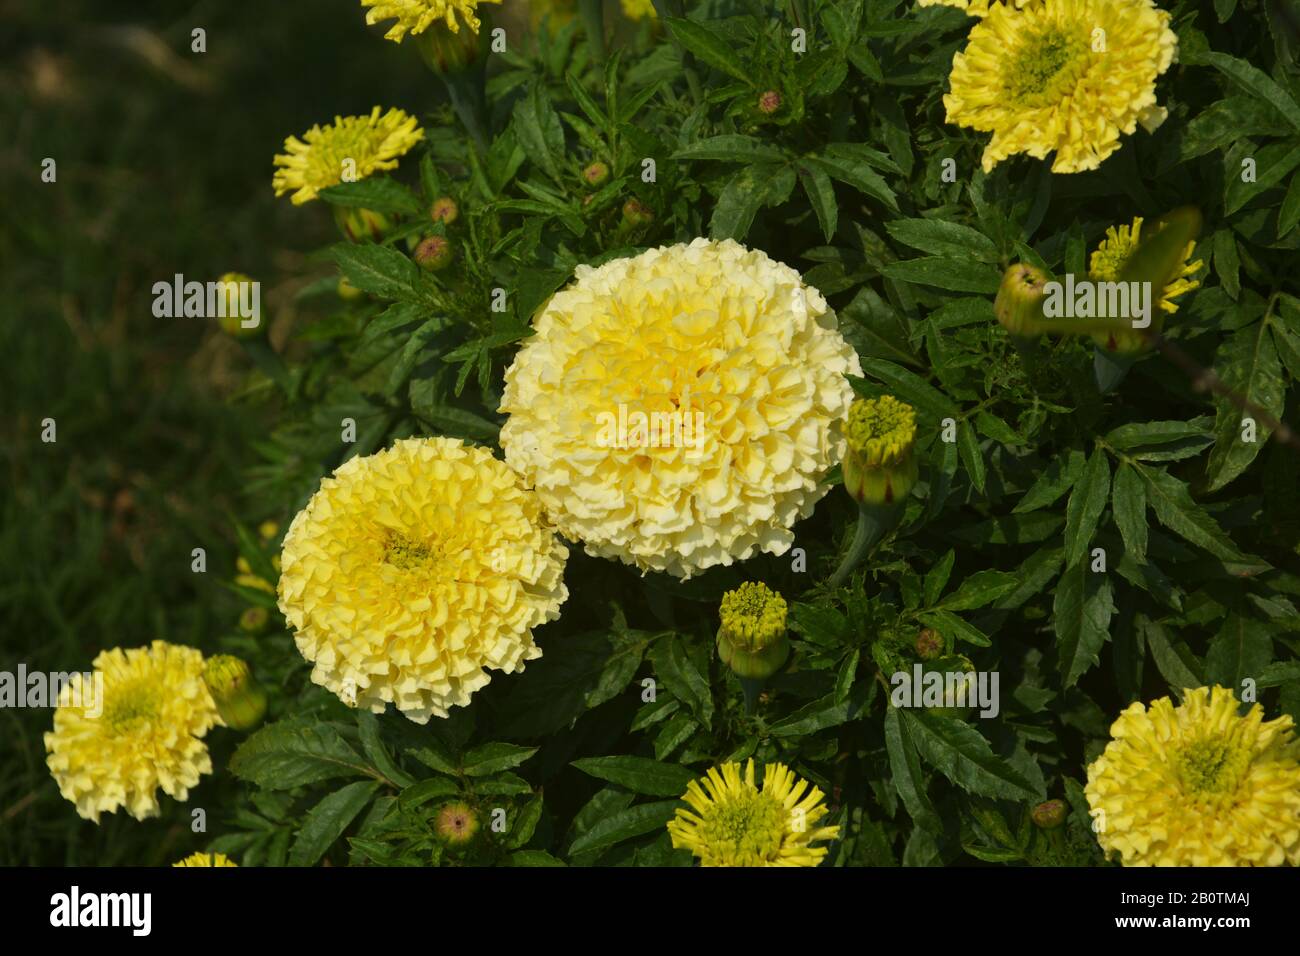 Close up of Indian yellow inka genda marigold flowers growing in a garden with green leaves, selective focusing Stock Photo